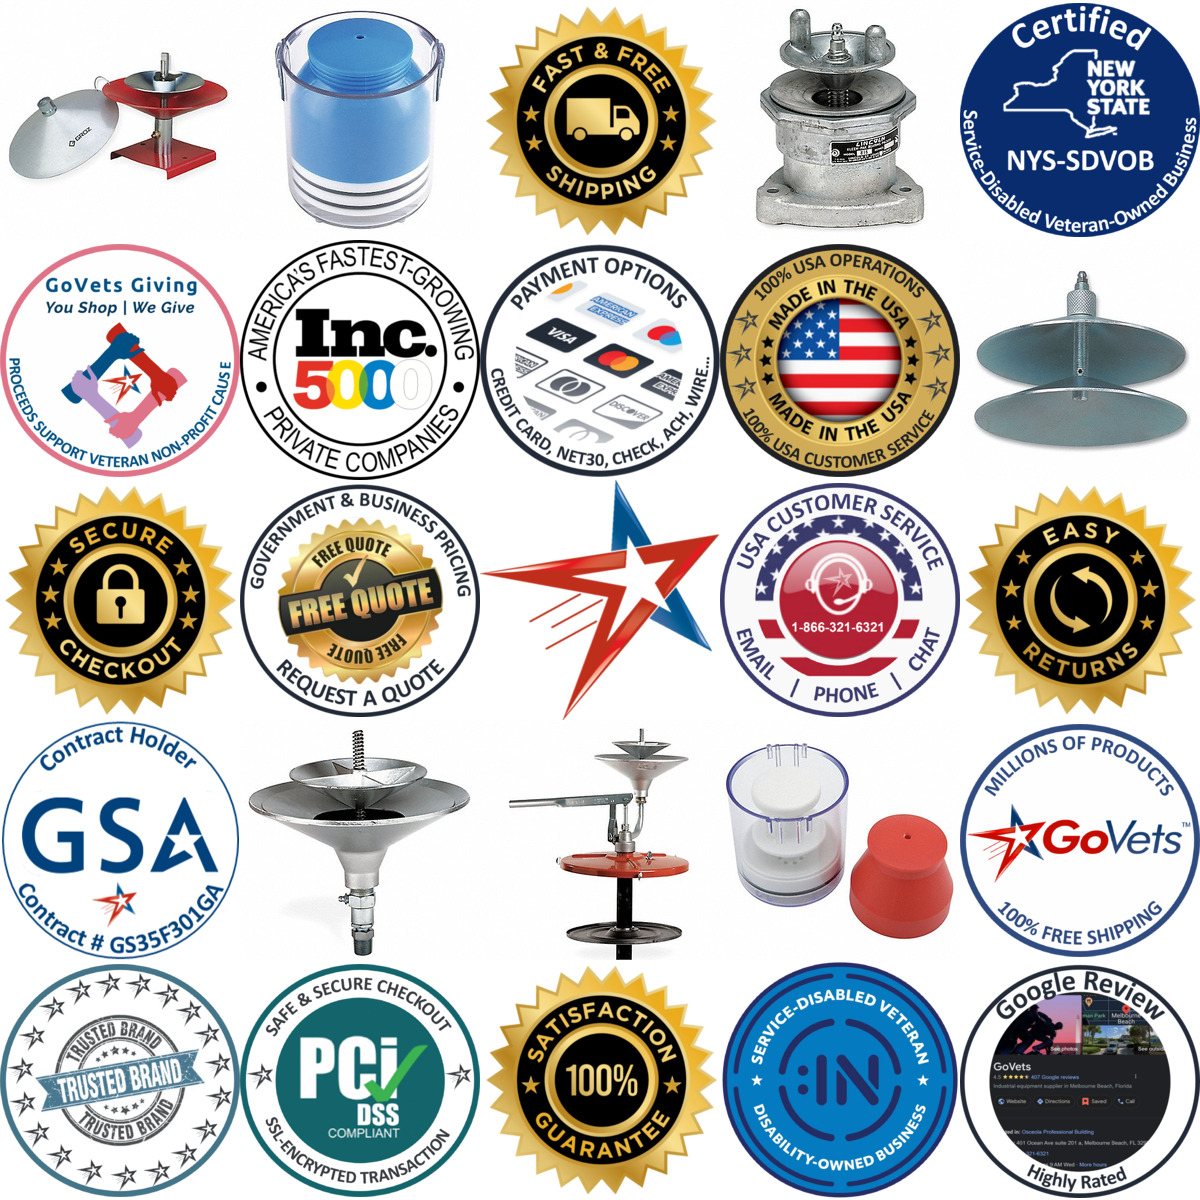 A selection of Bearing Packers products on GoVets